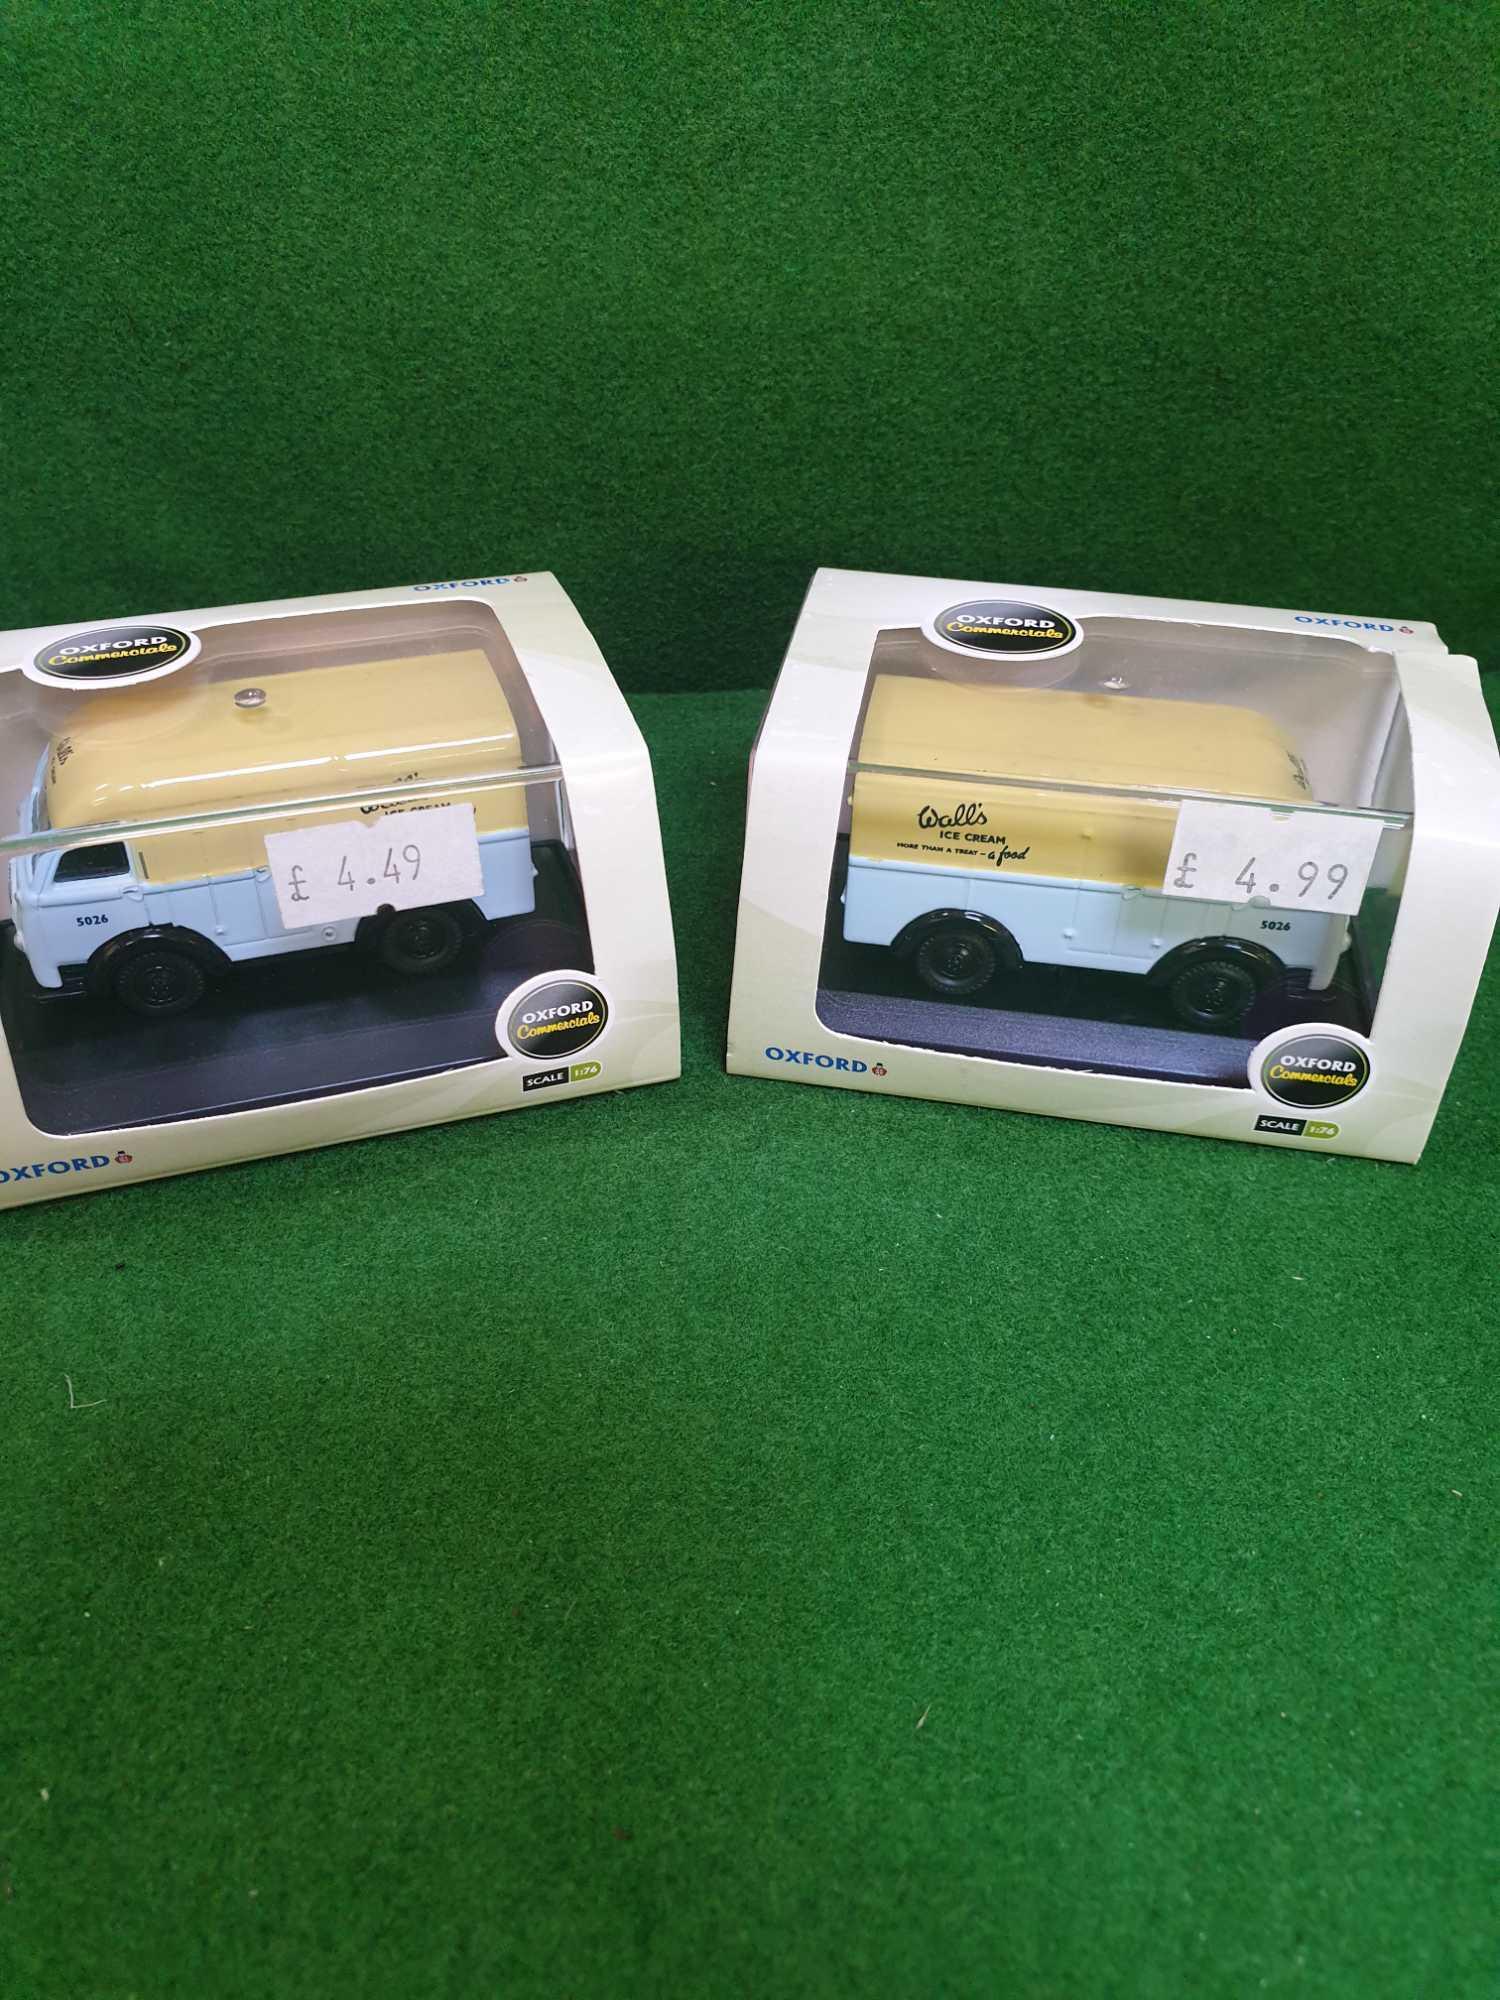 5x Oxford Road Show Diecast Models Comprising of #HA003 Oxford Diecast Walls Ice Cream - #CA002 - Image 5 of 5